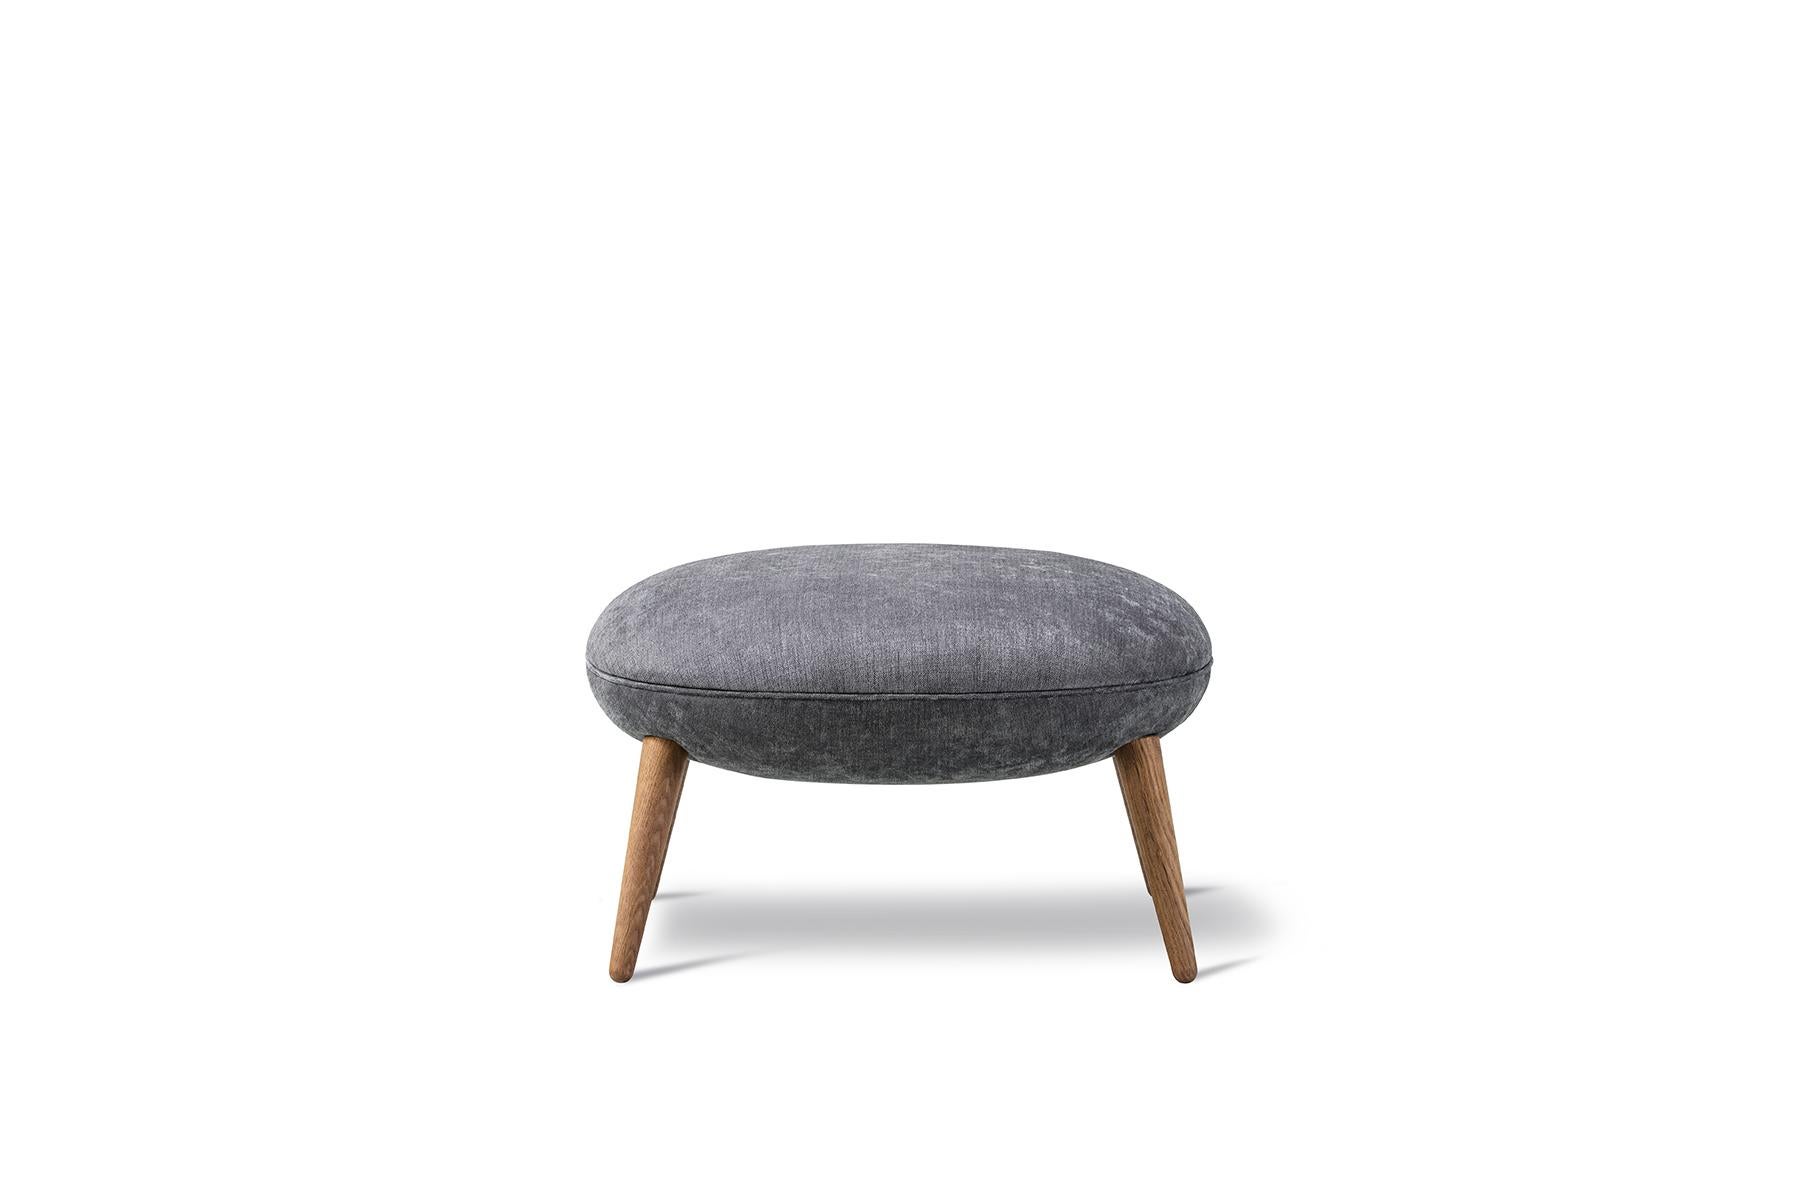 Space Copenhagen swoon ottoman to supplement the swoon chair; creating a sophisticated lounge set that invites hours of comfort.